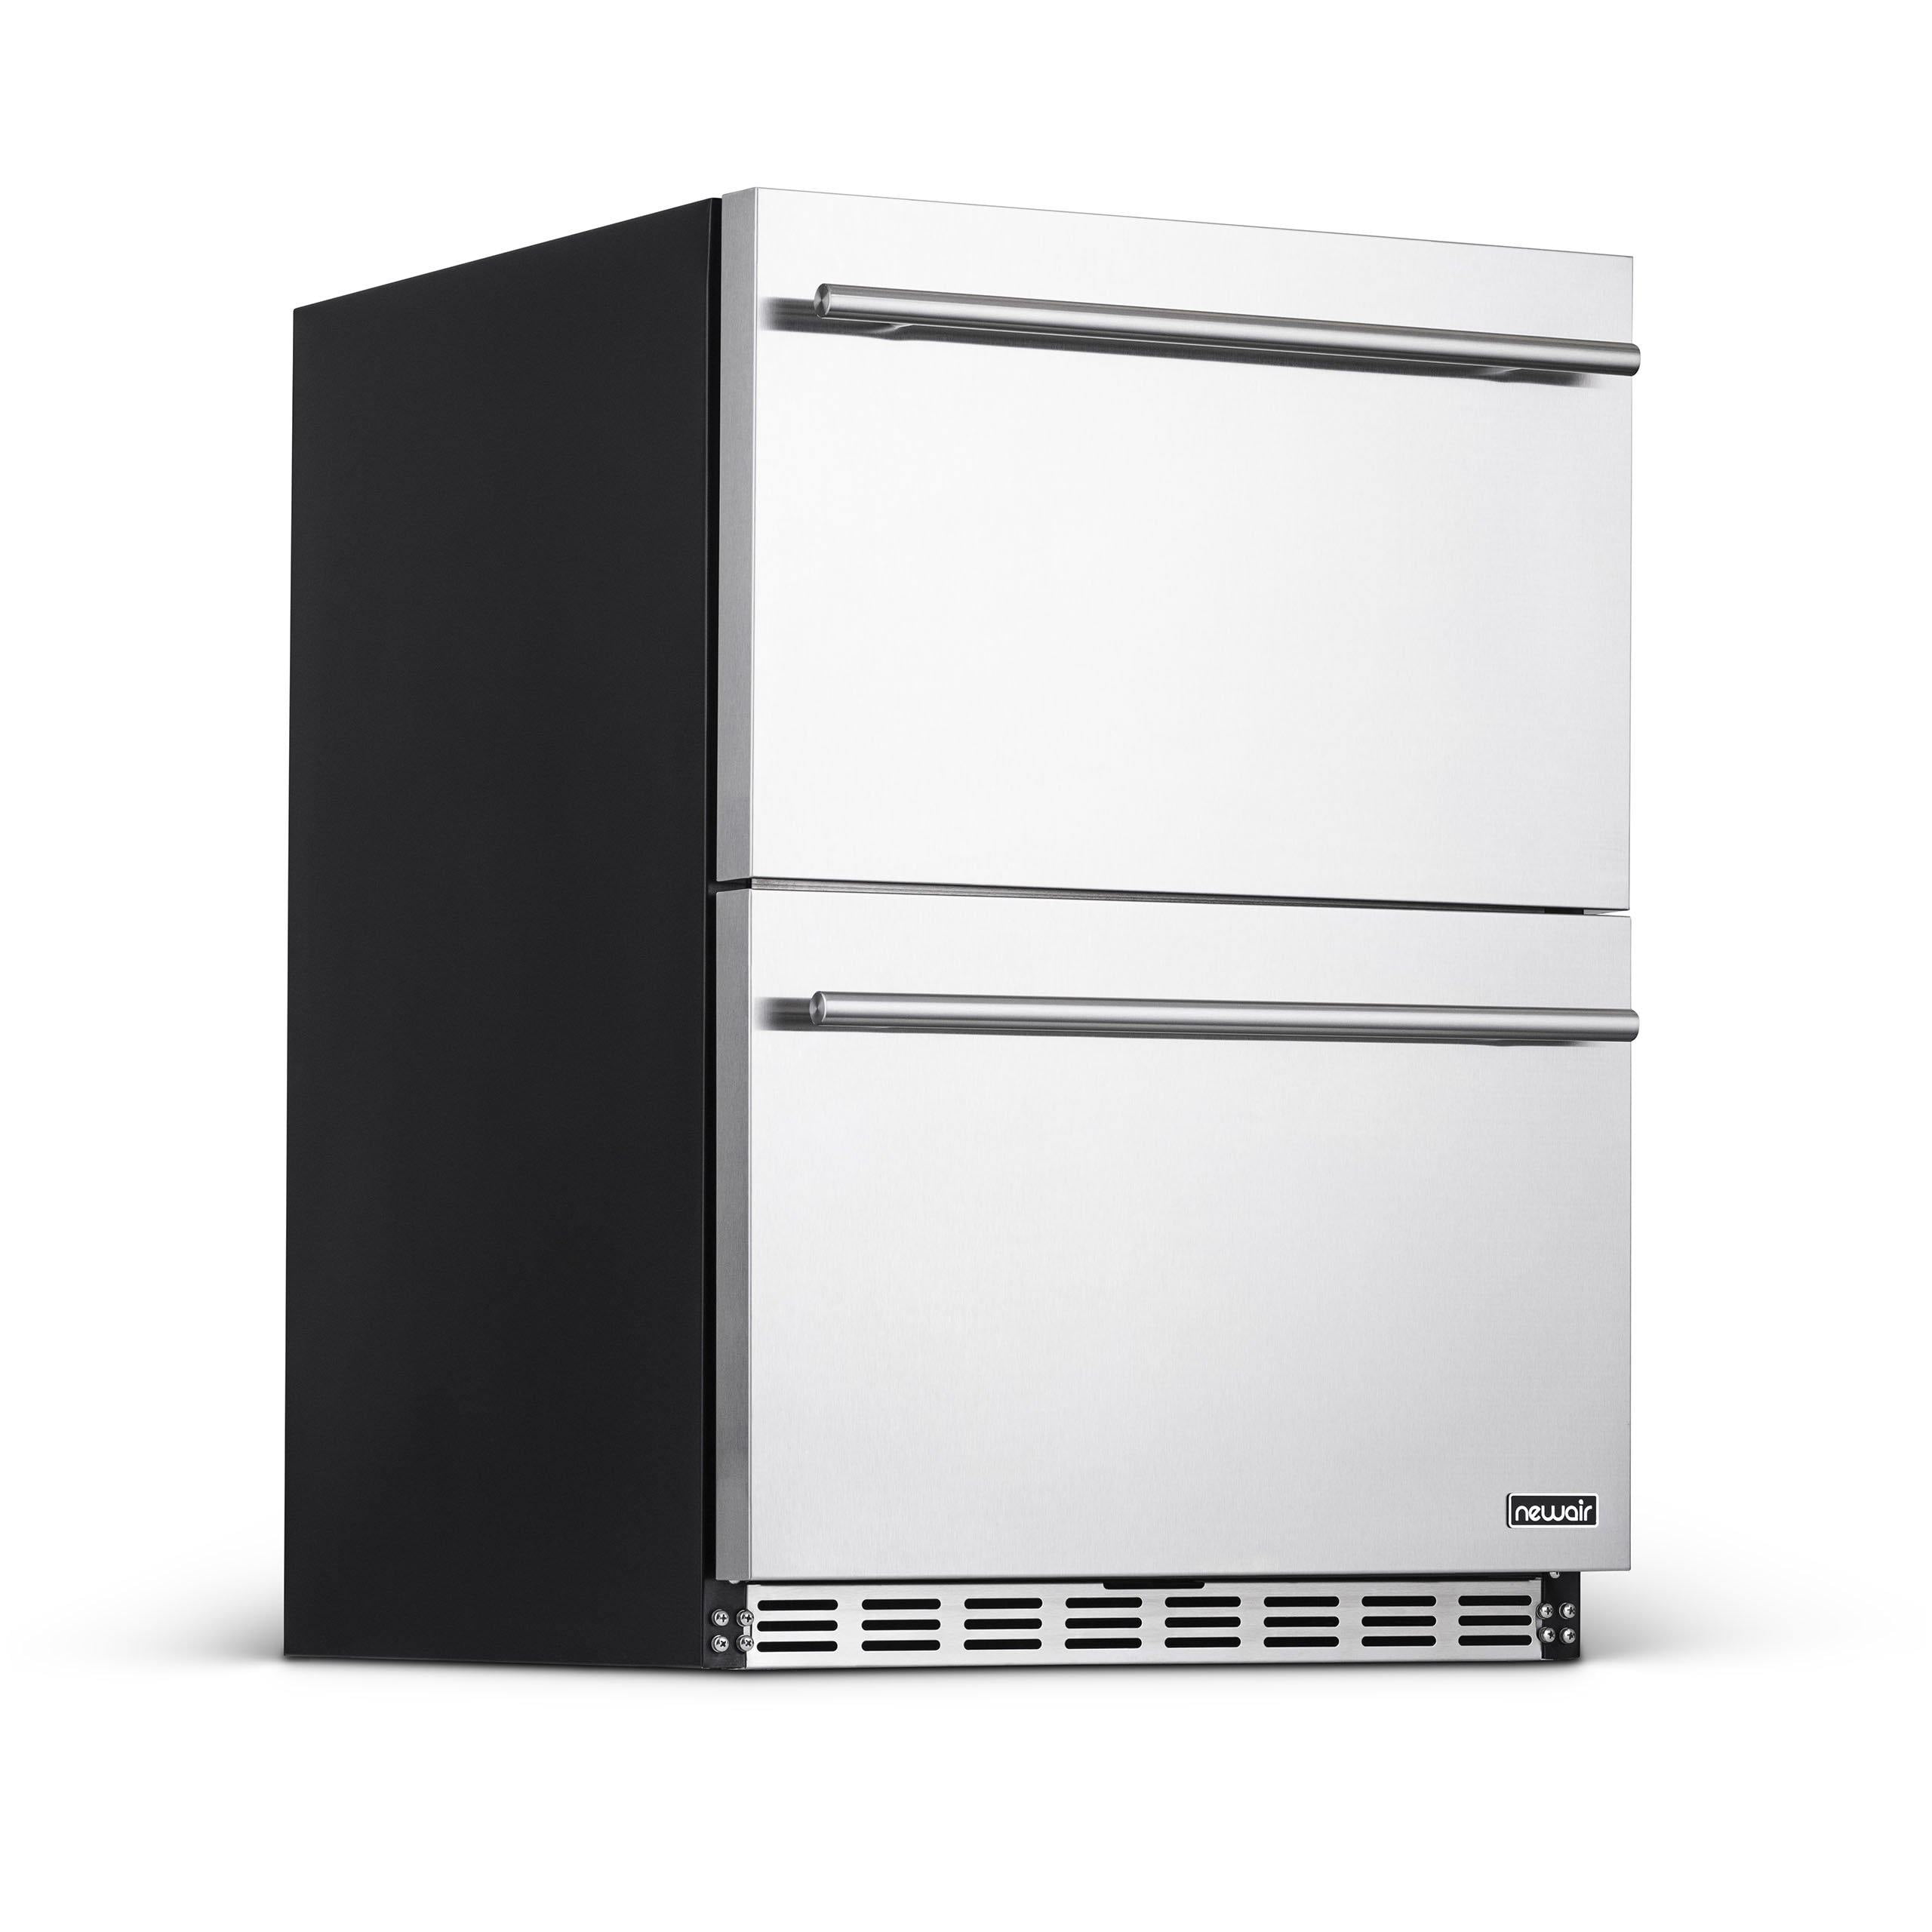 Newair 24" Built-in 20 Bottle and 80 Can Dual Drawer Indoor in Stainless Steel - NOF100SS00 - image 1 of 24